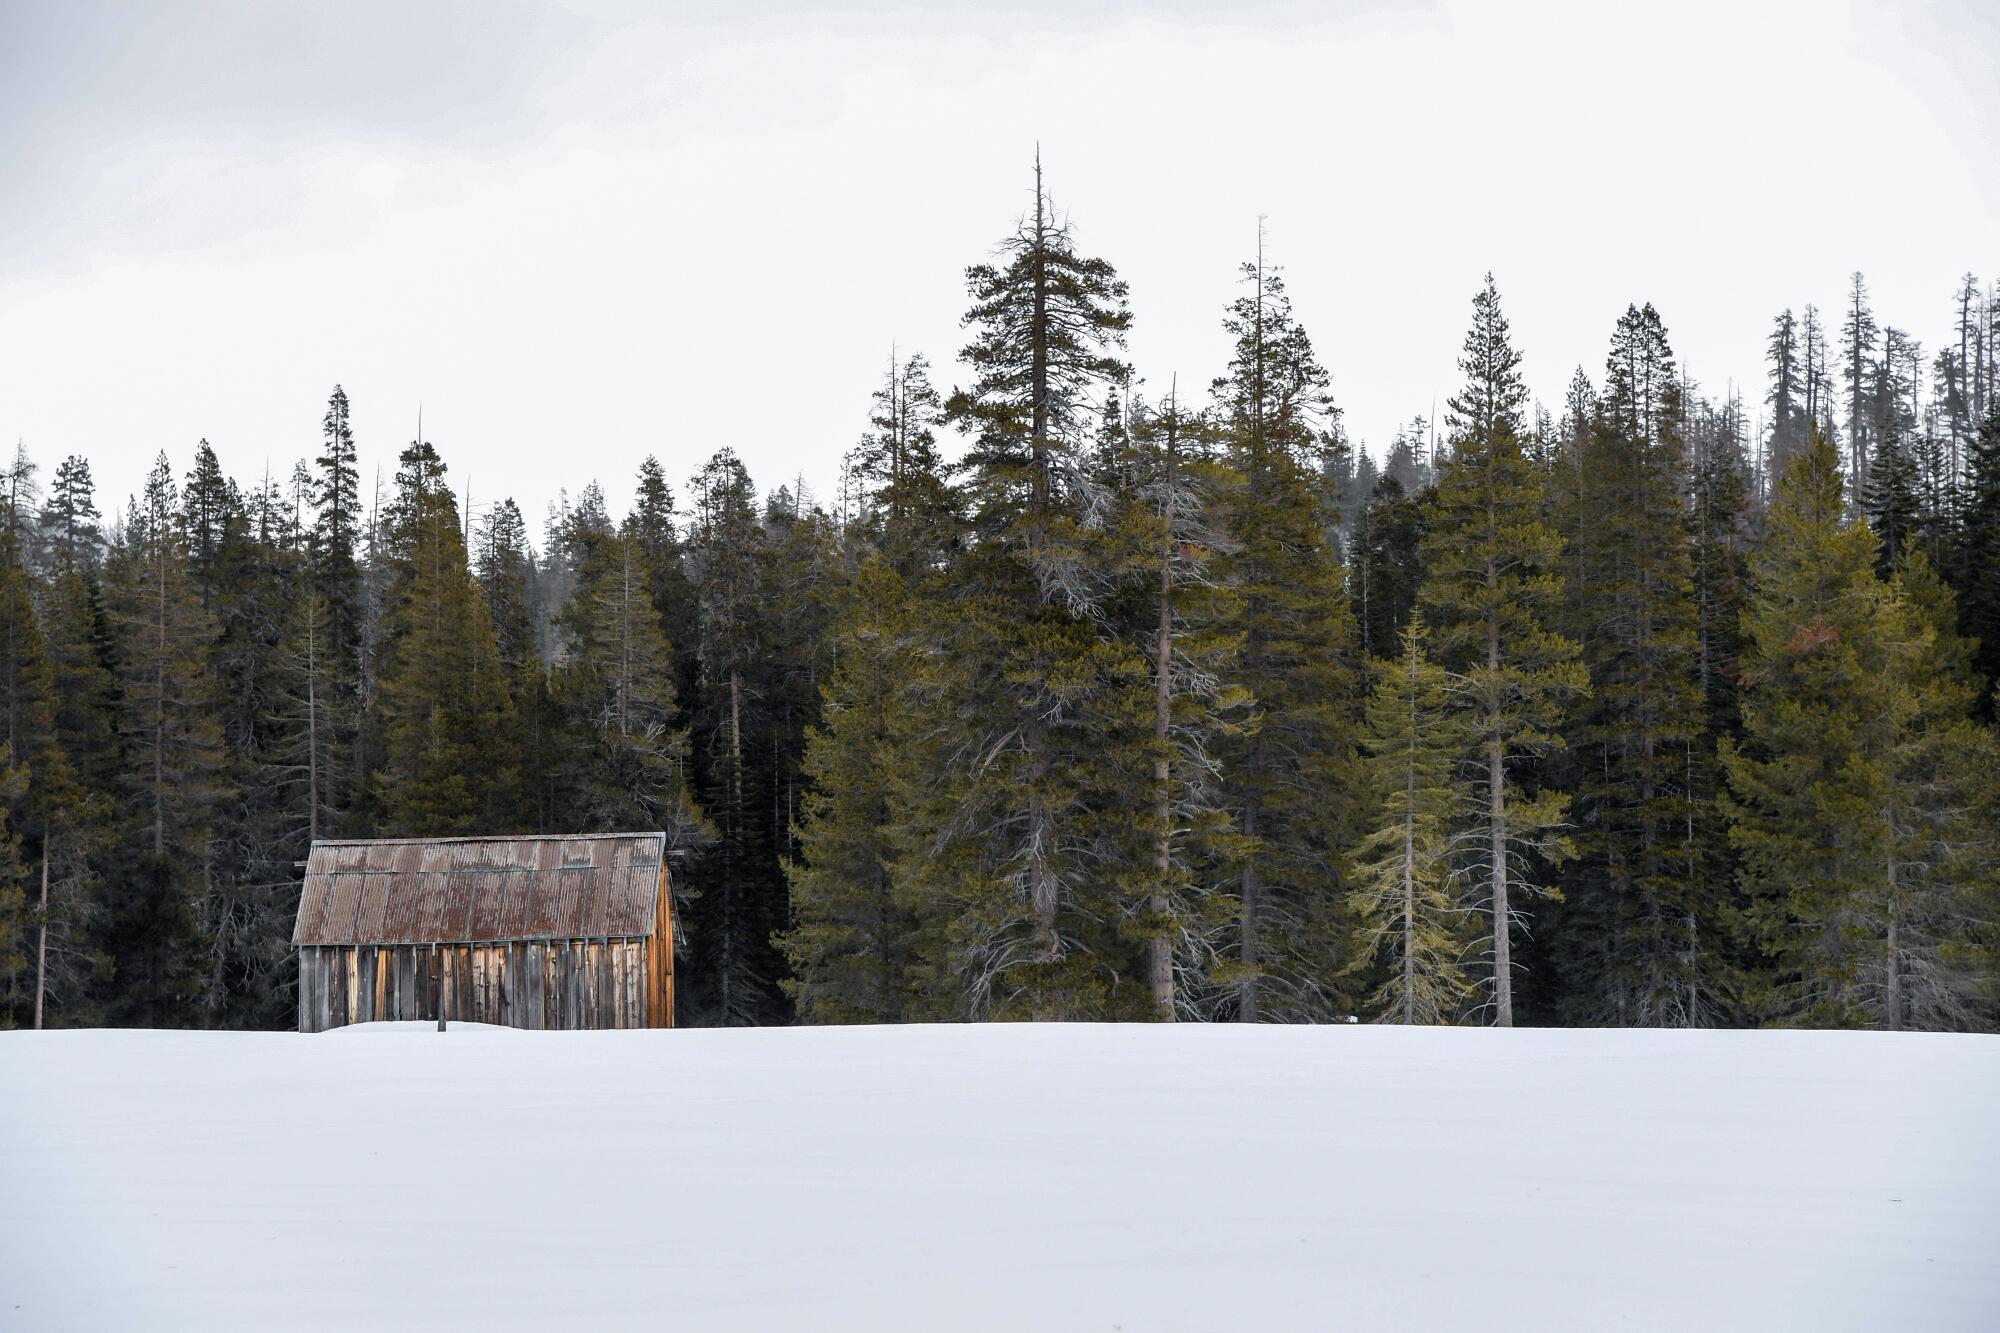 Snow blankets a field as a wooden shed and towering evergreens fill the background.